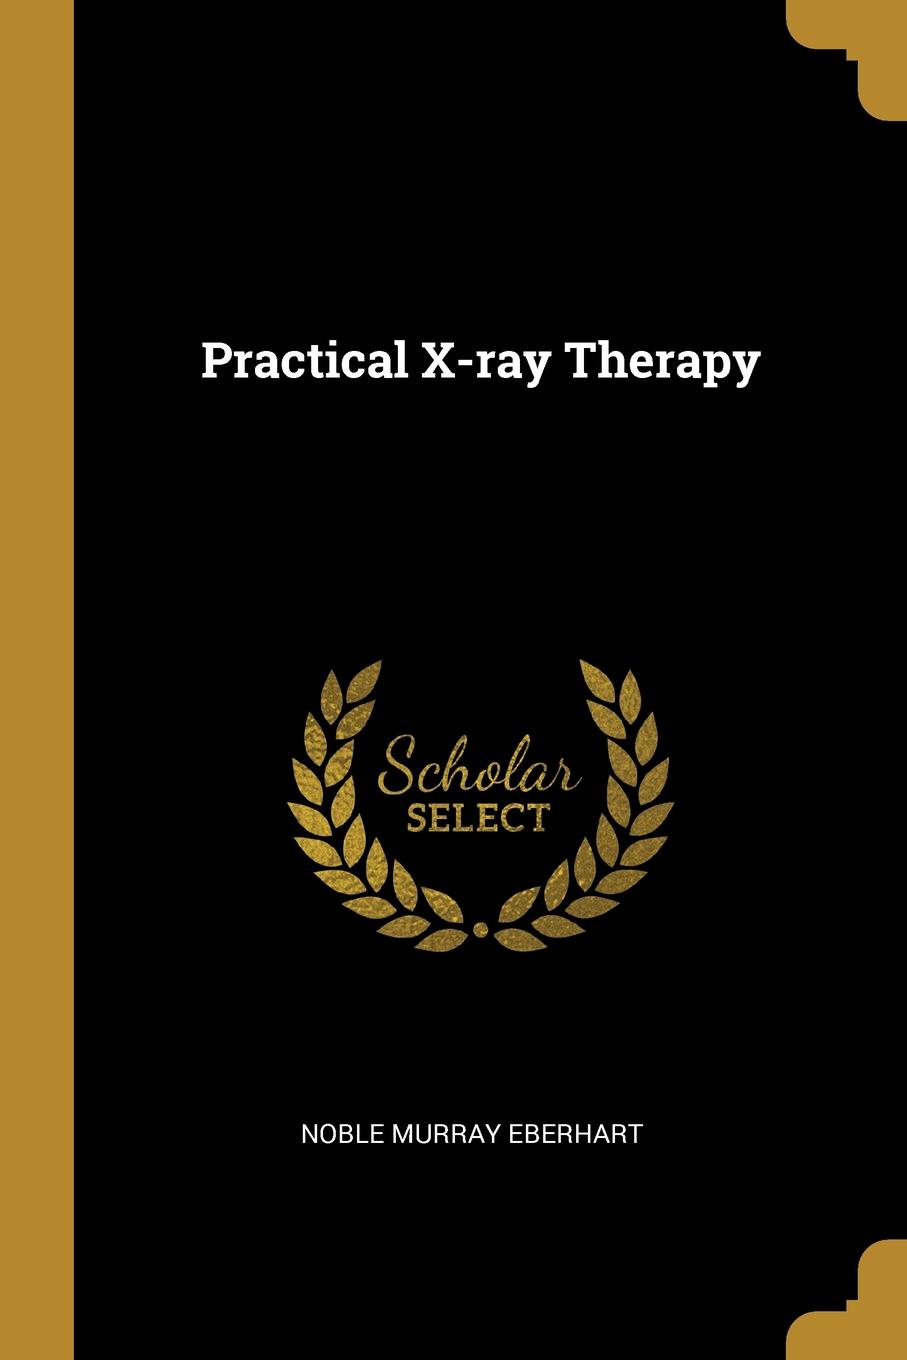 Practical X-ray Therapy